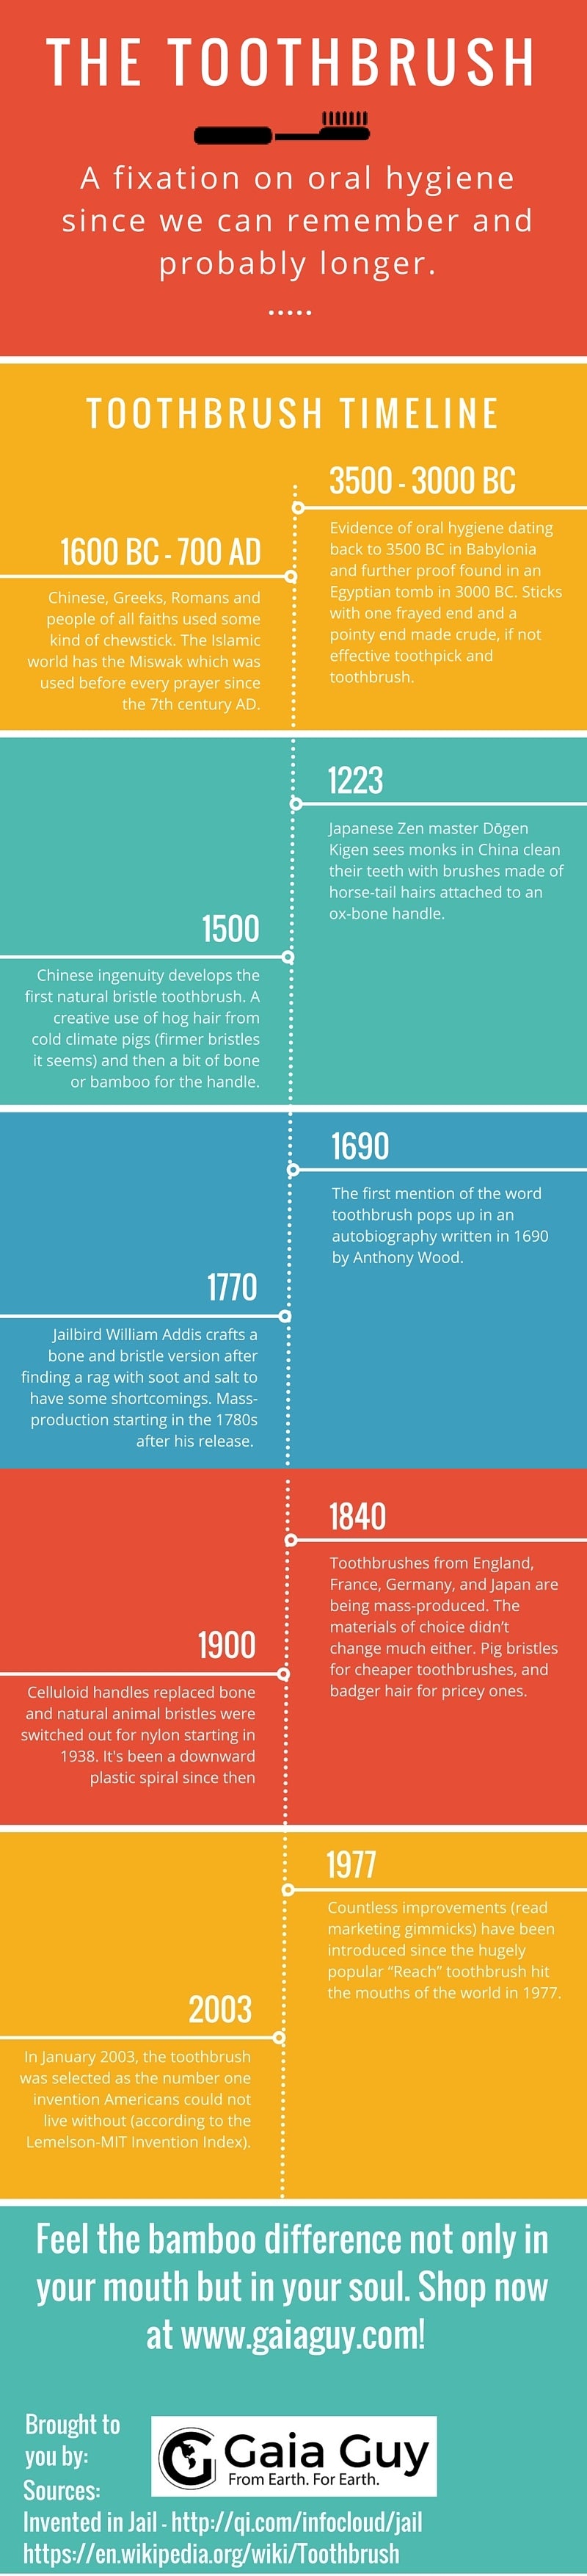 the history of the toothbrush infographic